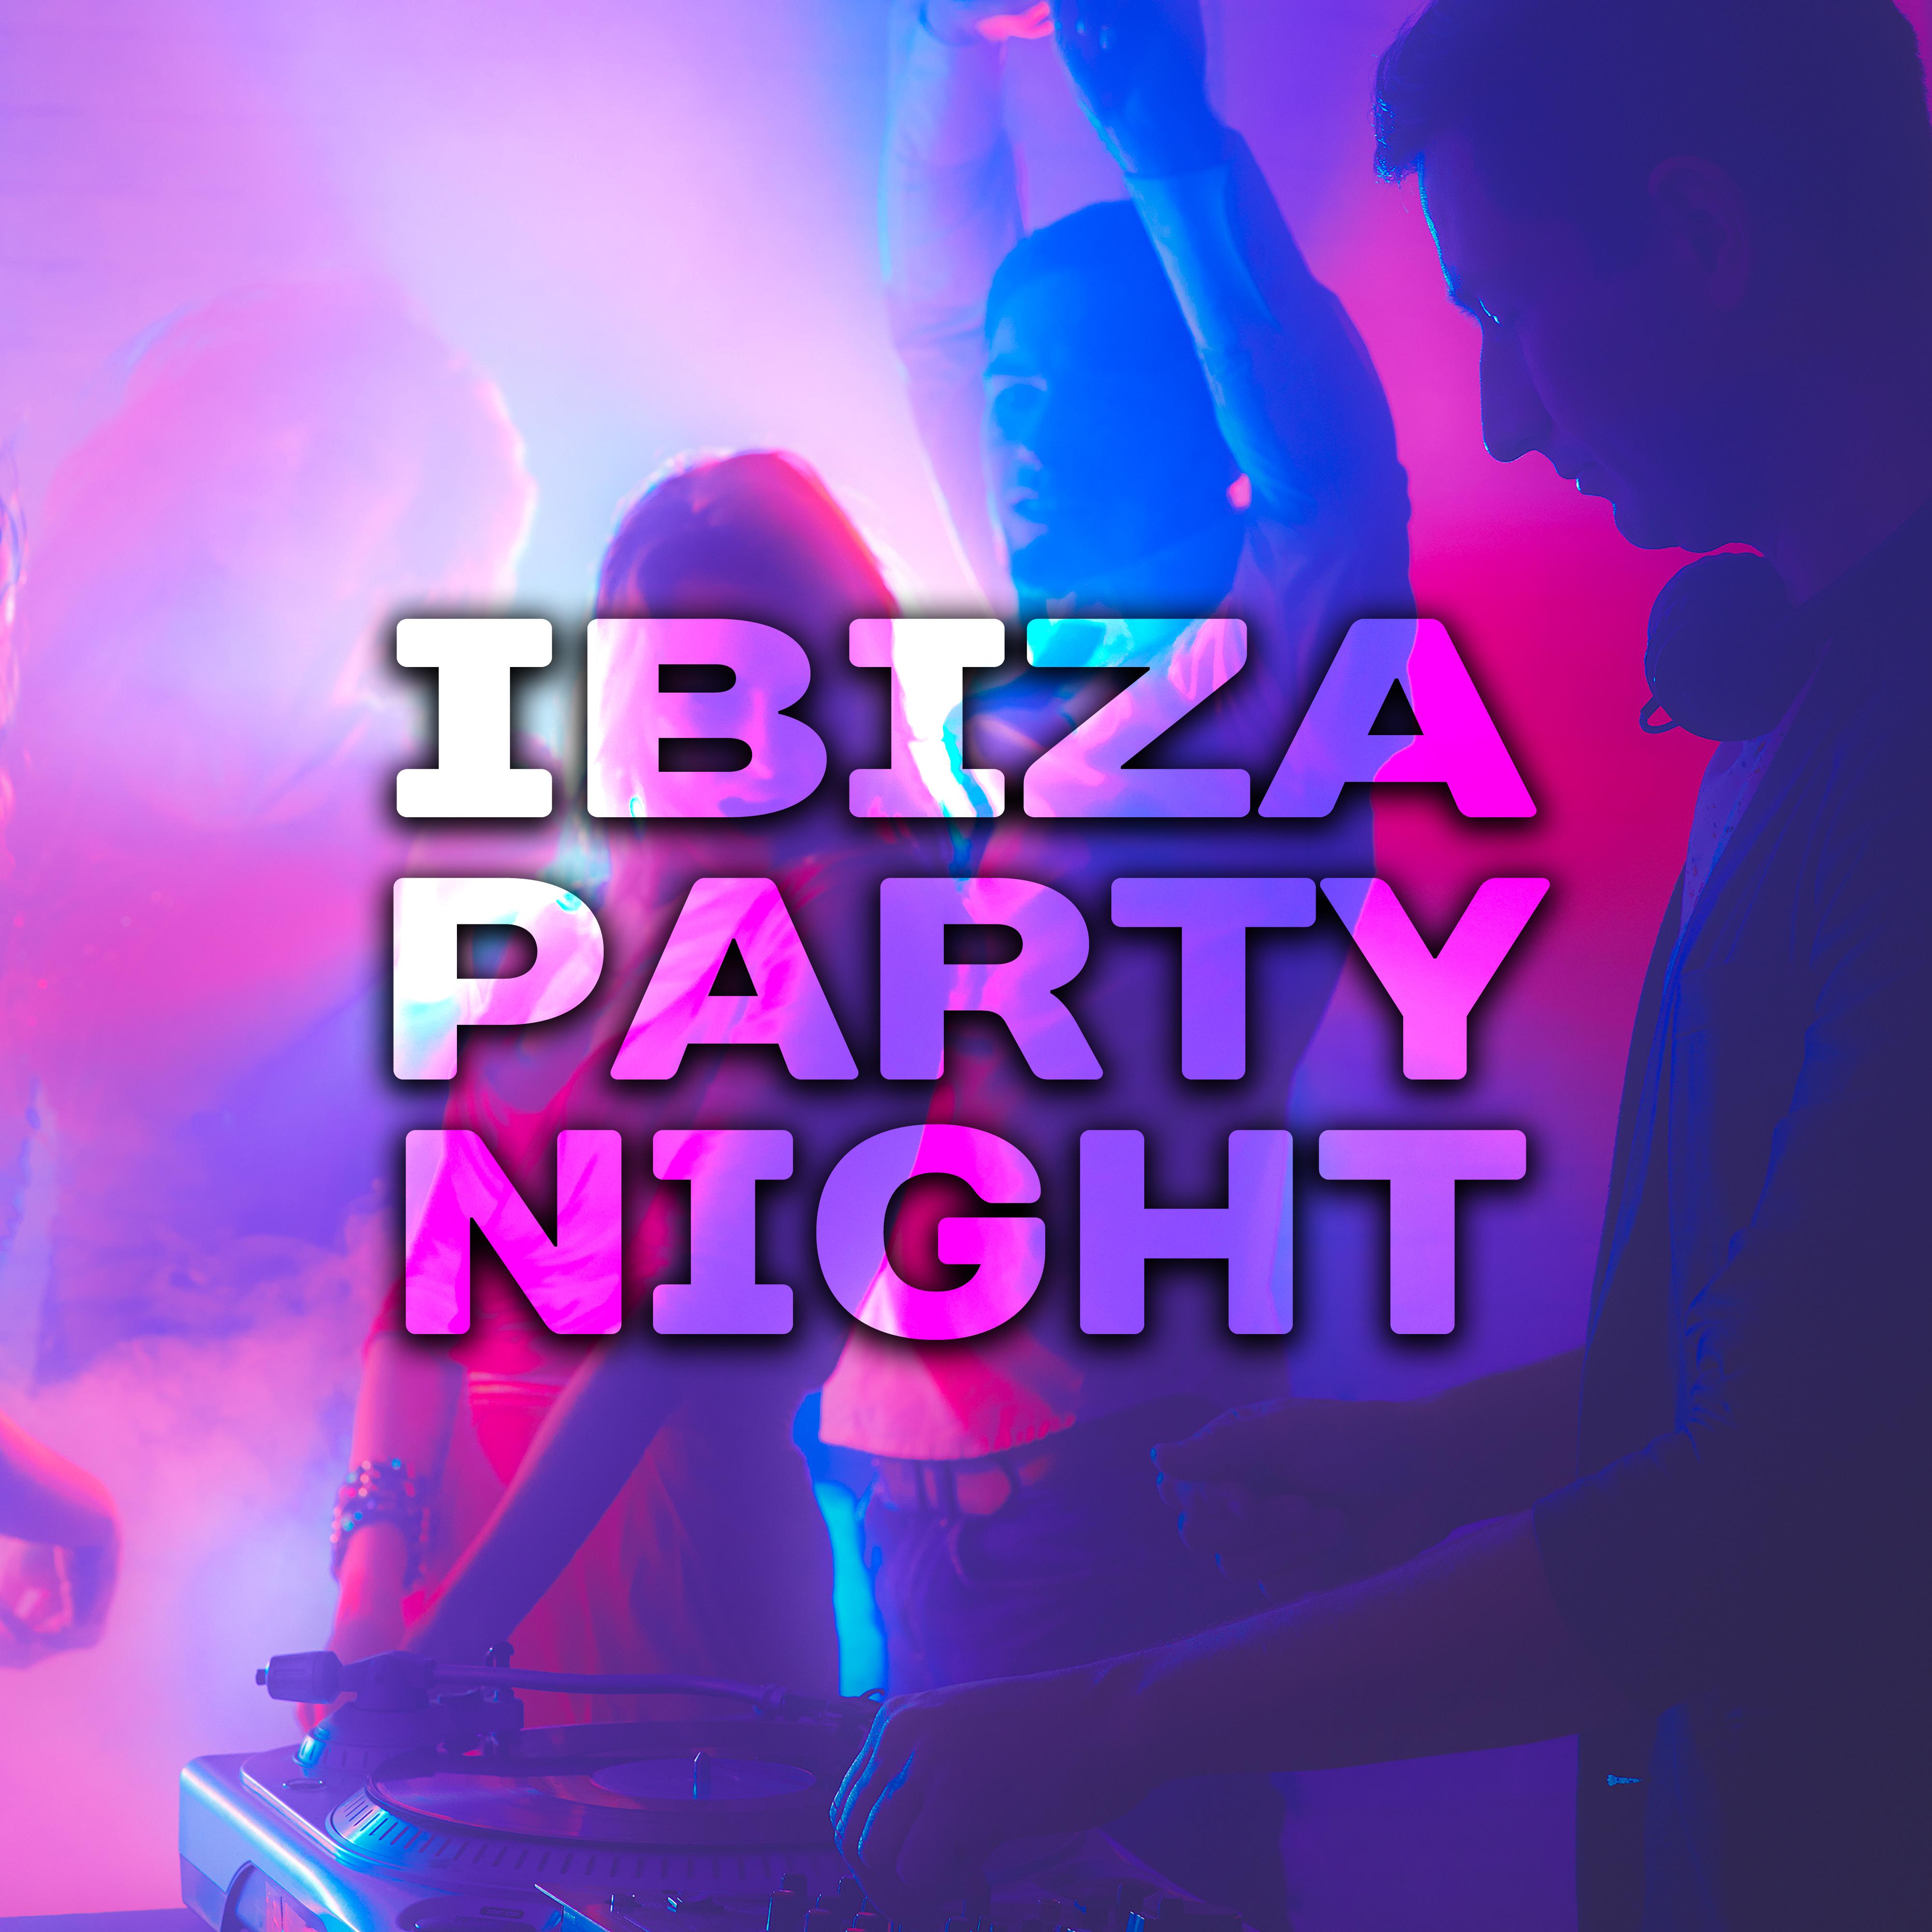 Ibiza Party Night – Chillout Hits, Dance Floor, Electronic Music, Summertime, Chill Out Music